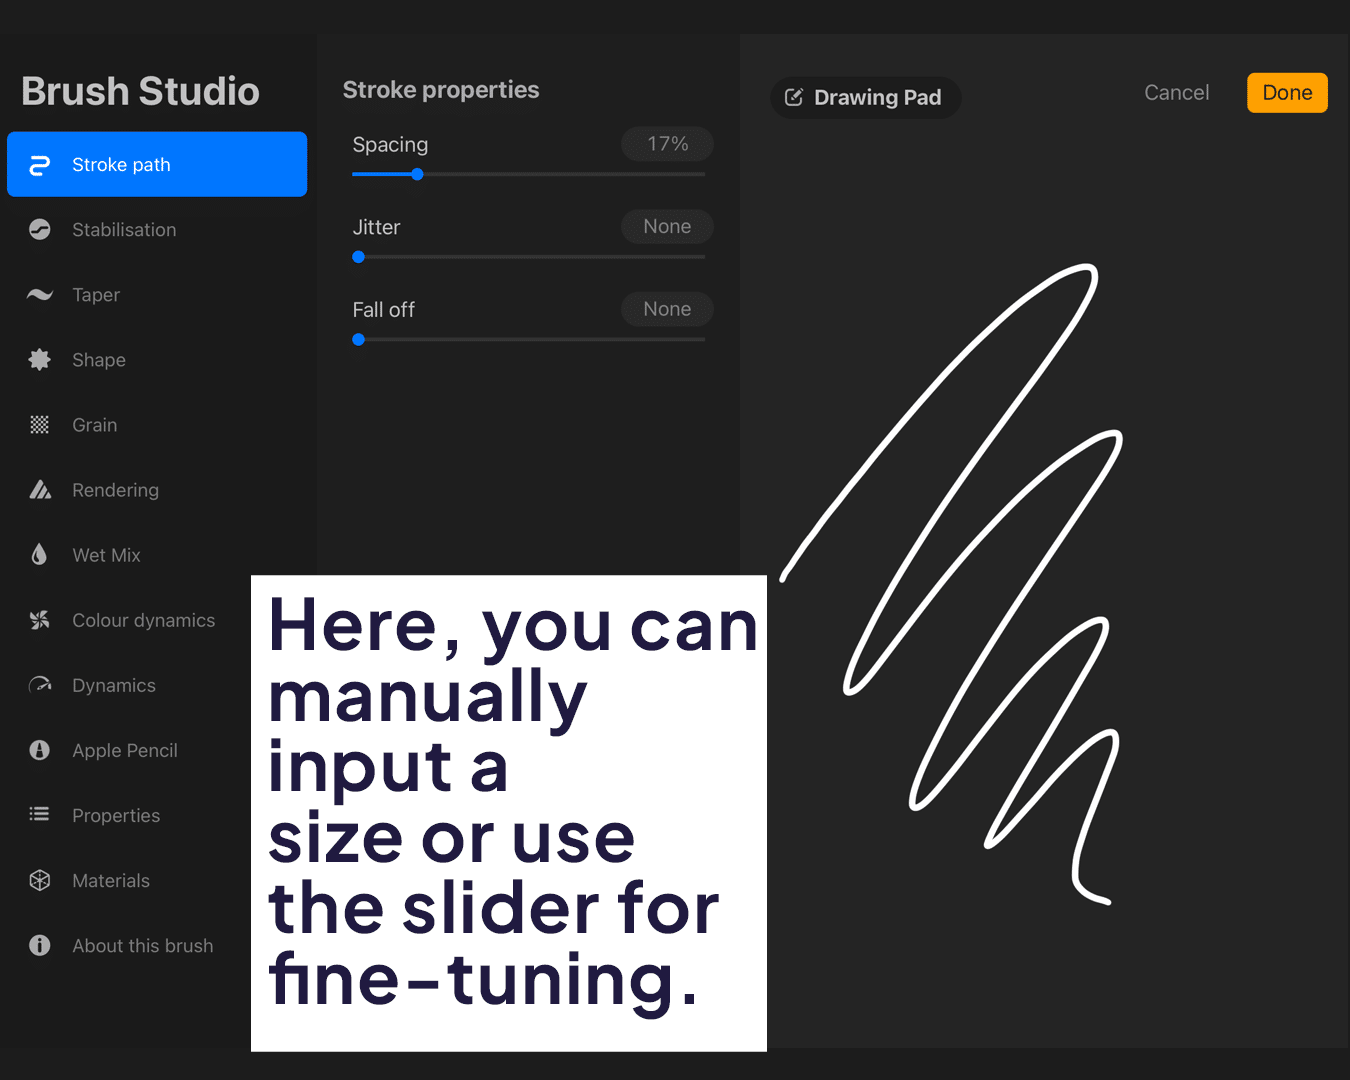 Adjusting the size and opacity sliders